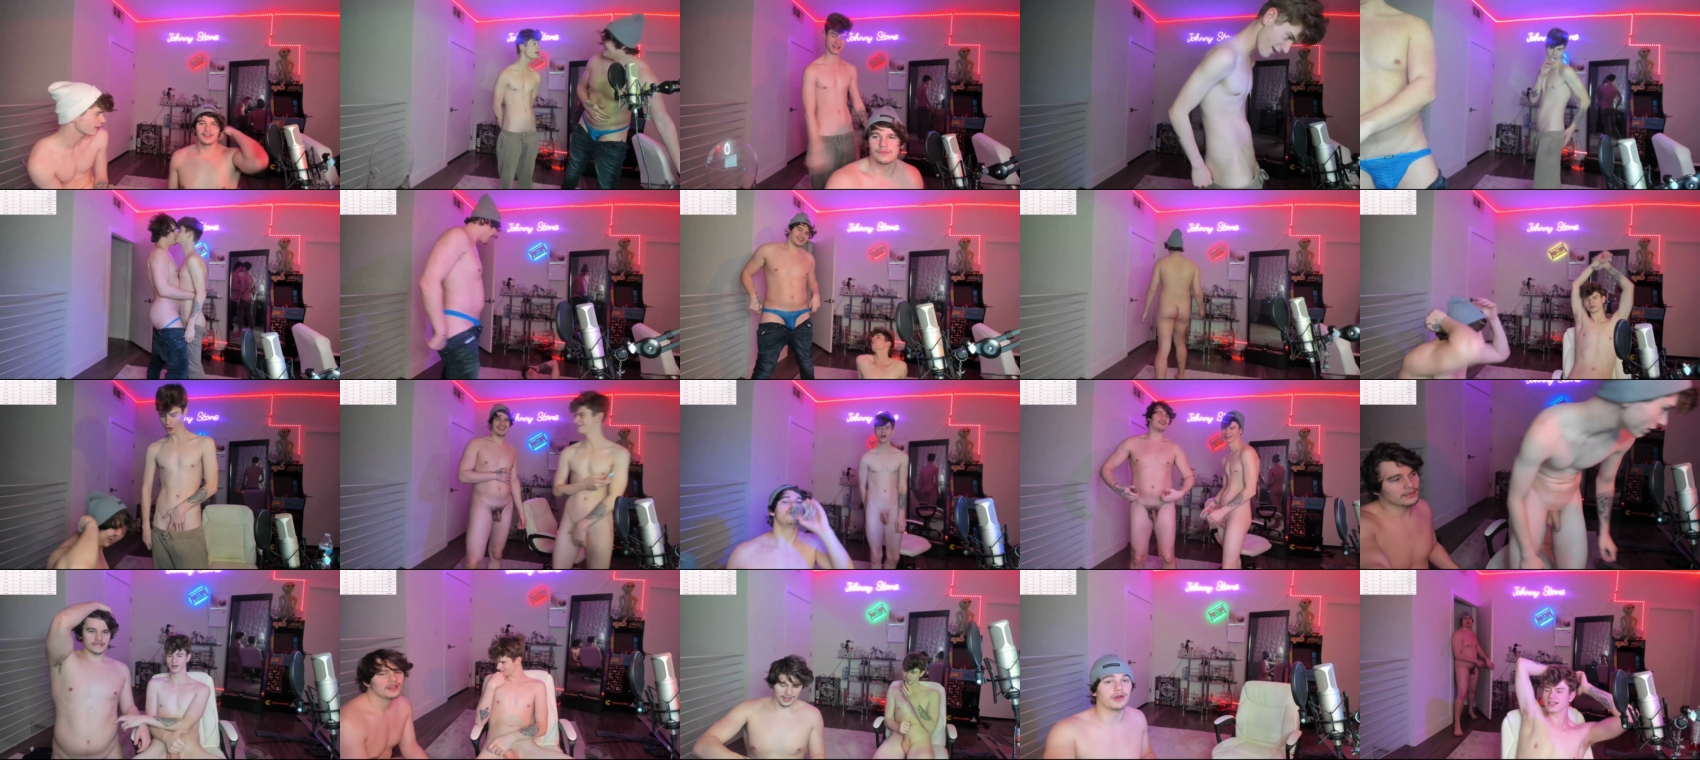 thejohnnystone  18-02-2023 Males naked